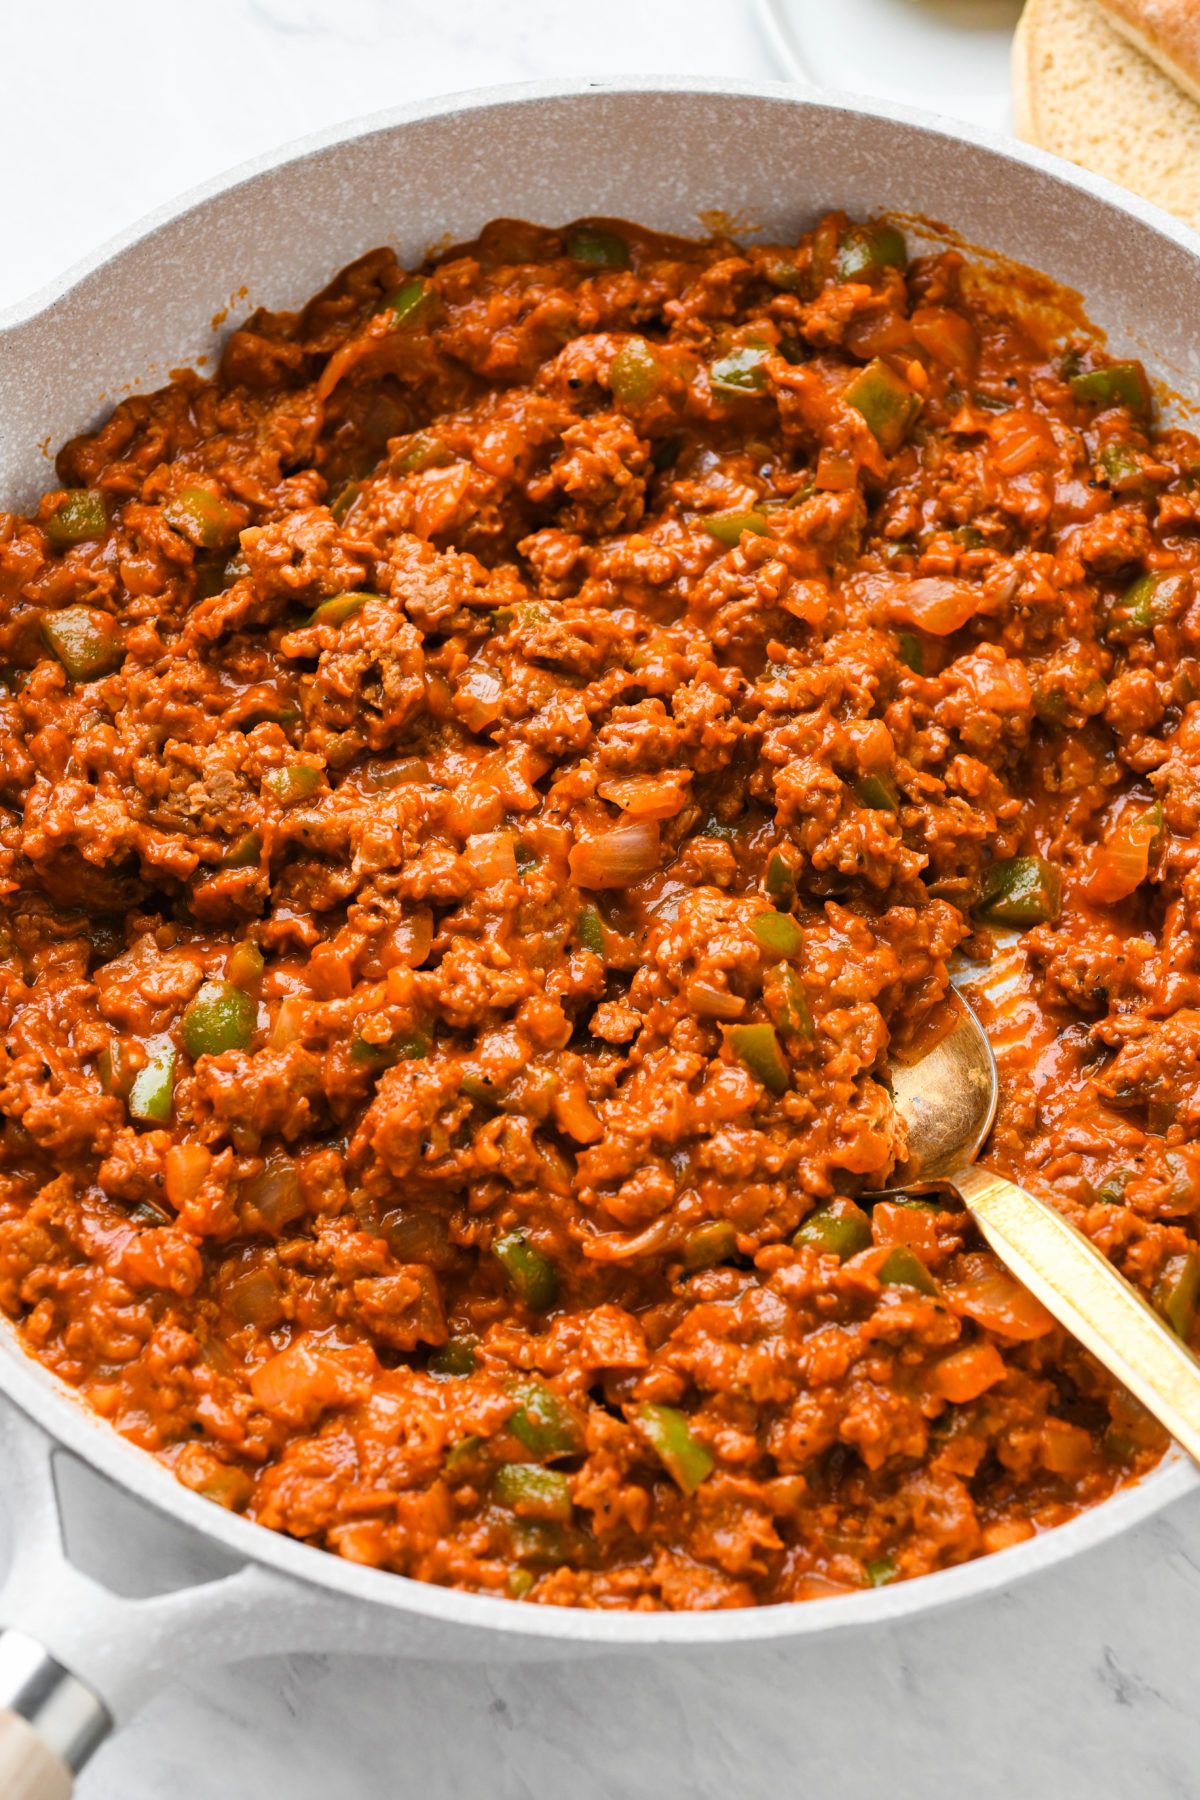 A pan with sloppy joes mixture cooking in it, and a serving spoon in the pan